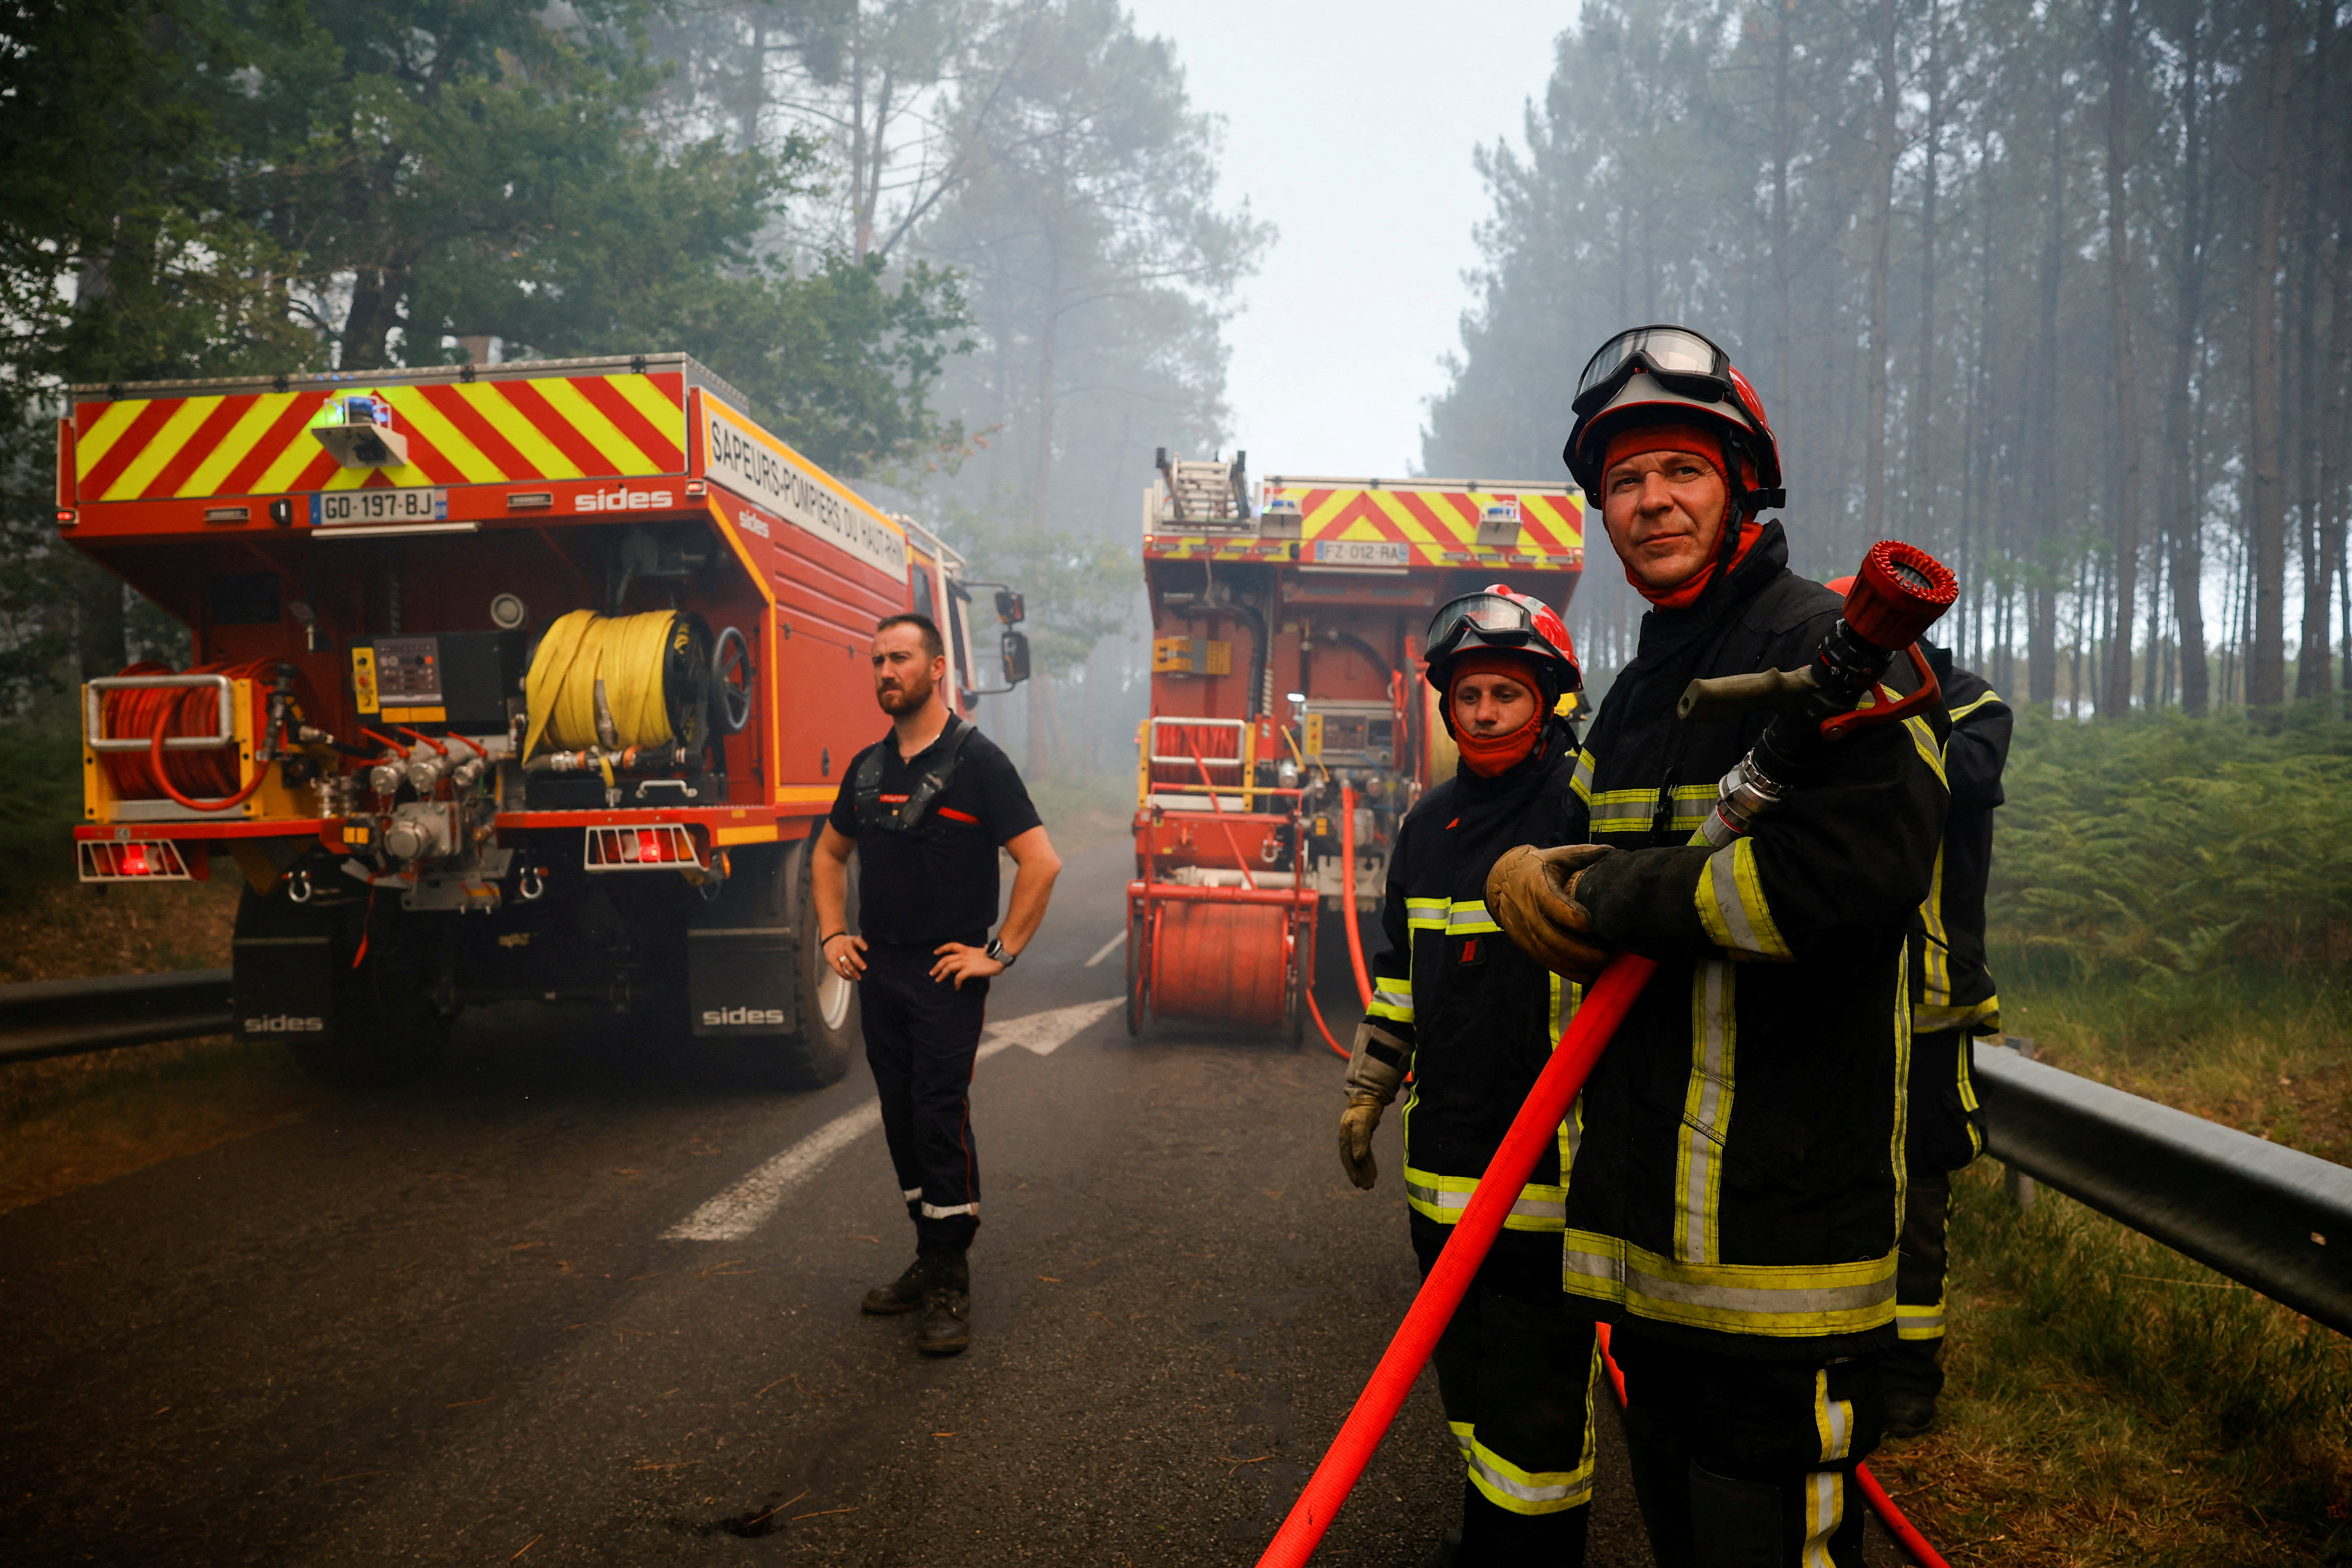 Firefighters work to contain a fire in Guillos, as wildfires continue to spread in the Gironde region of southwestern France